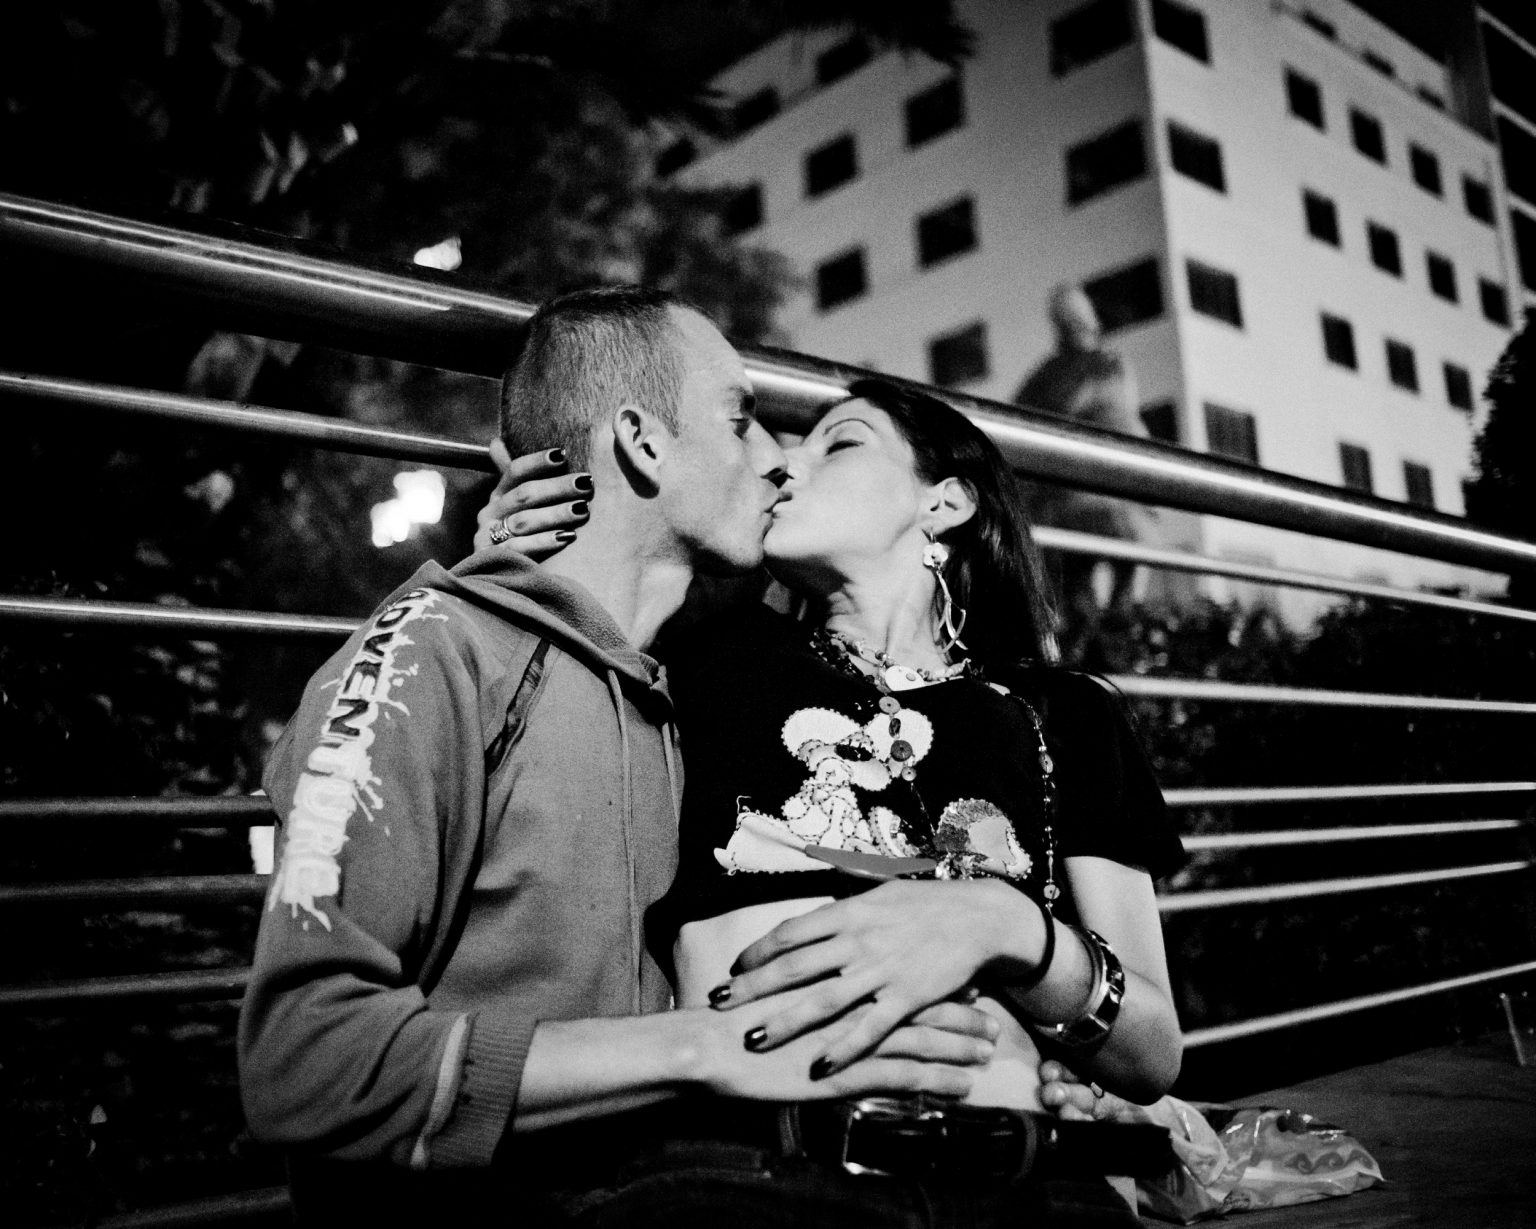 Maria and Kostas, both heroin addicts. Kissing in the Omonia square area, Athens, Greece. 2012